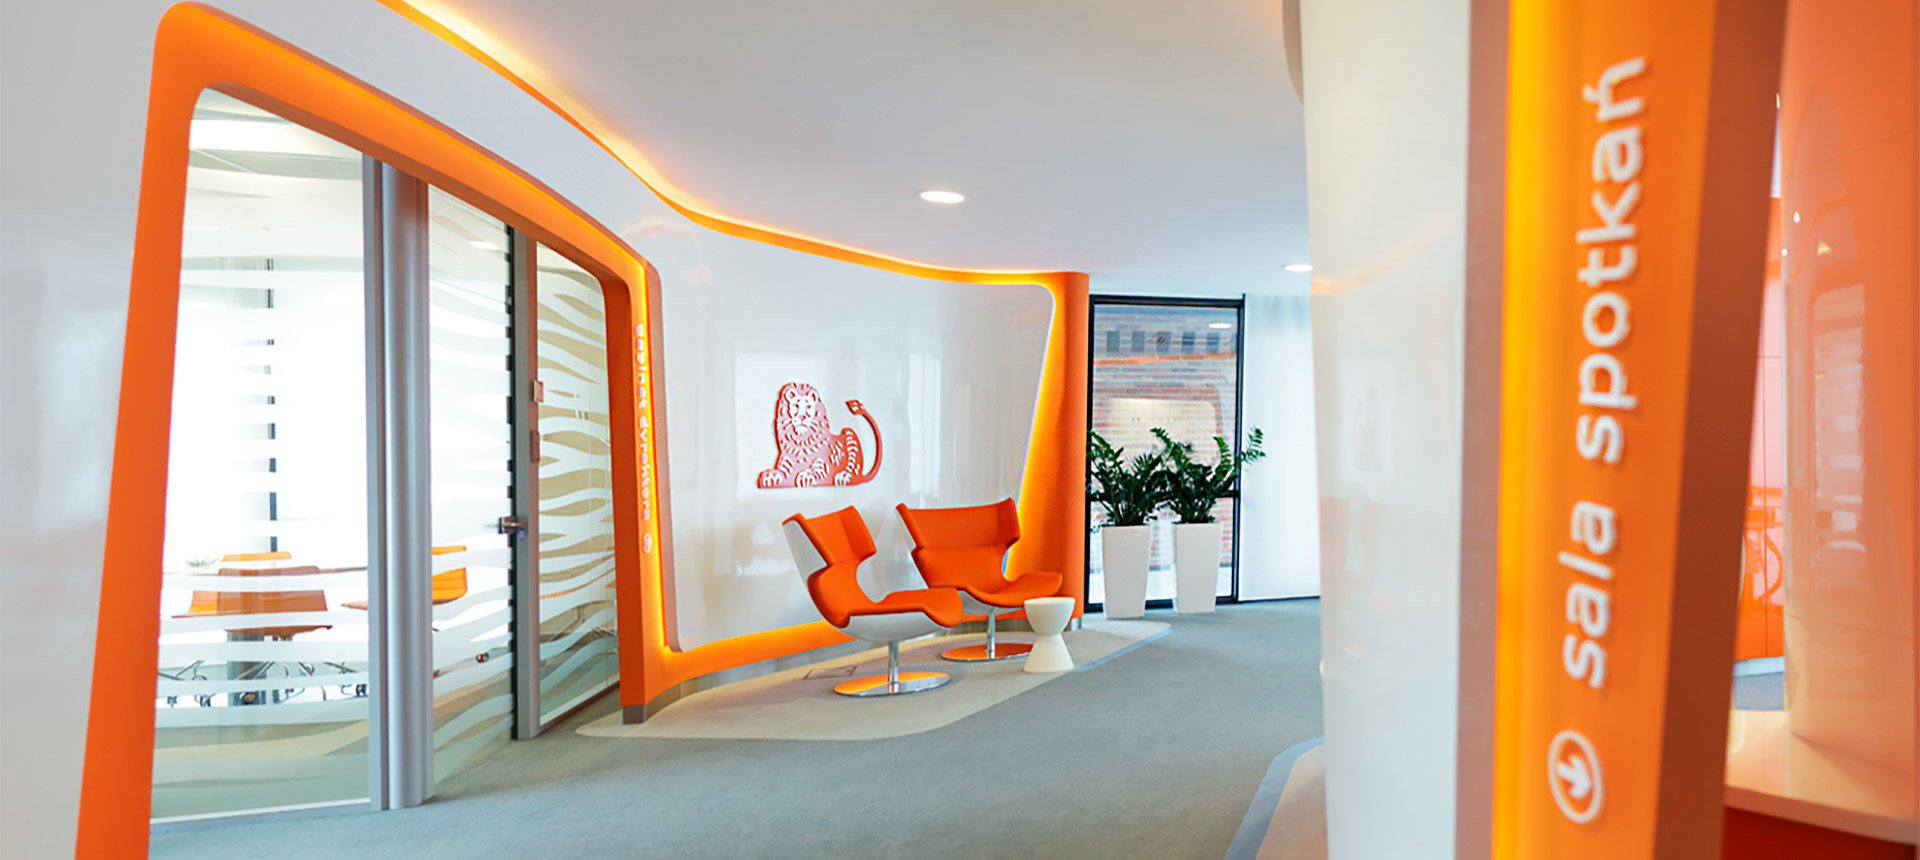 Agile outsourcing in ING Bank